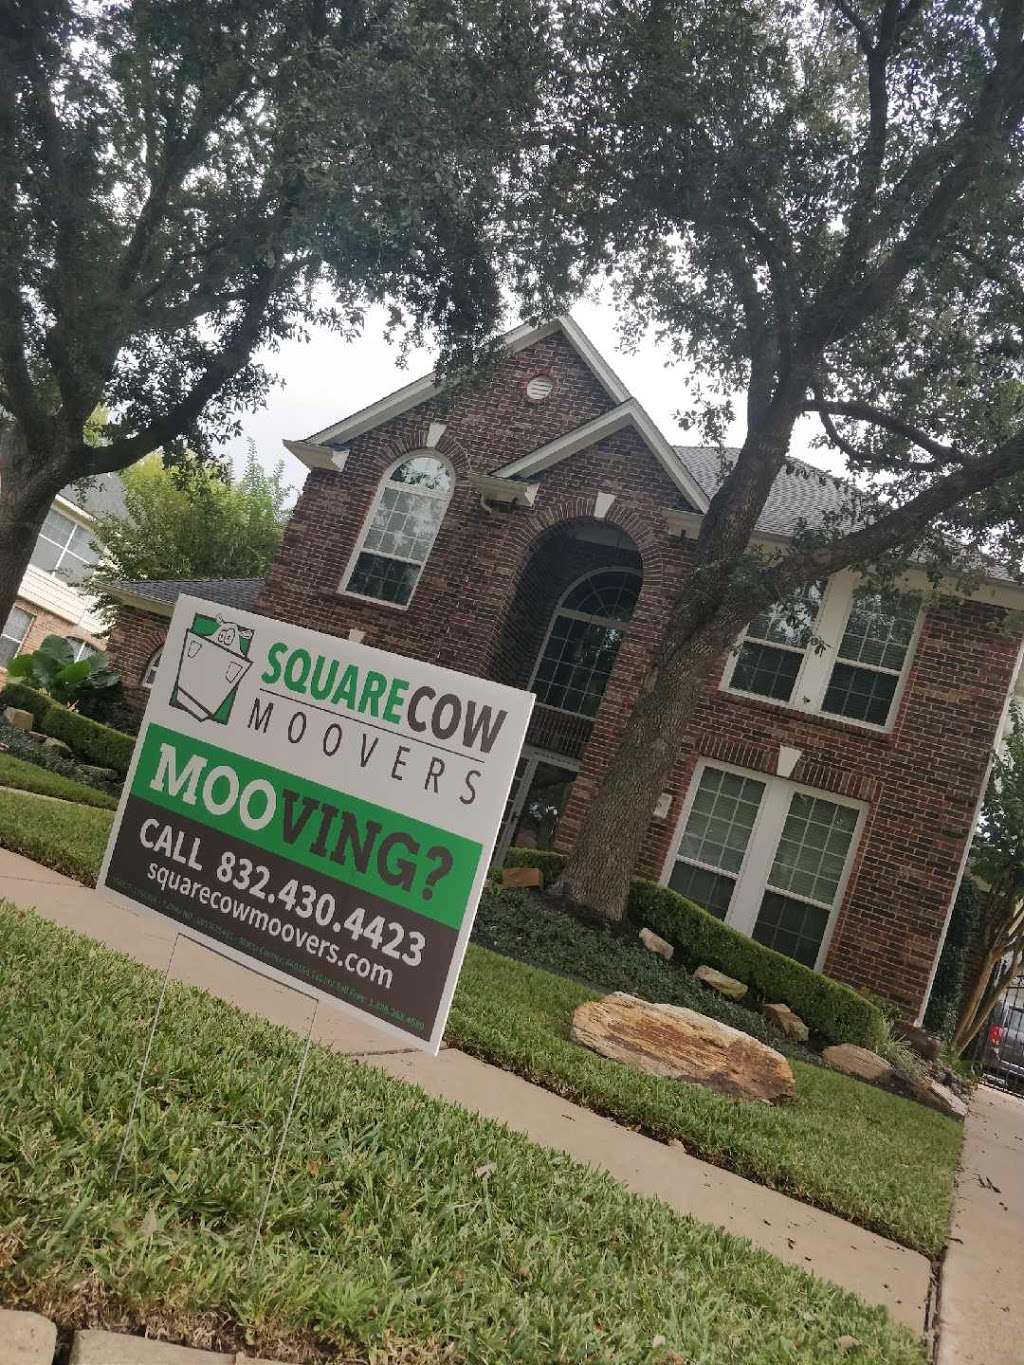 Square Cow Movers Pearland | 3325 S Main St, Pearland, TX 77581 | Phone: (832) 430-4423